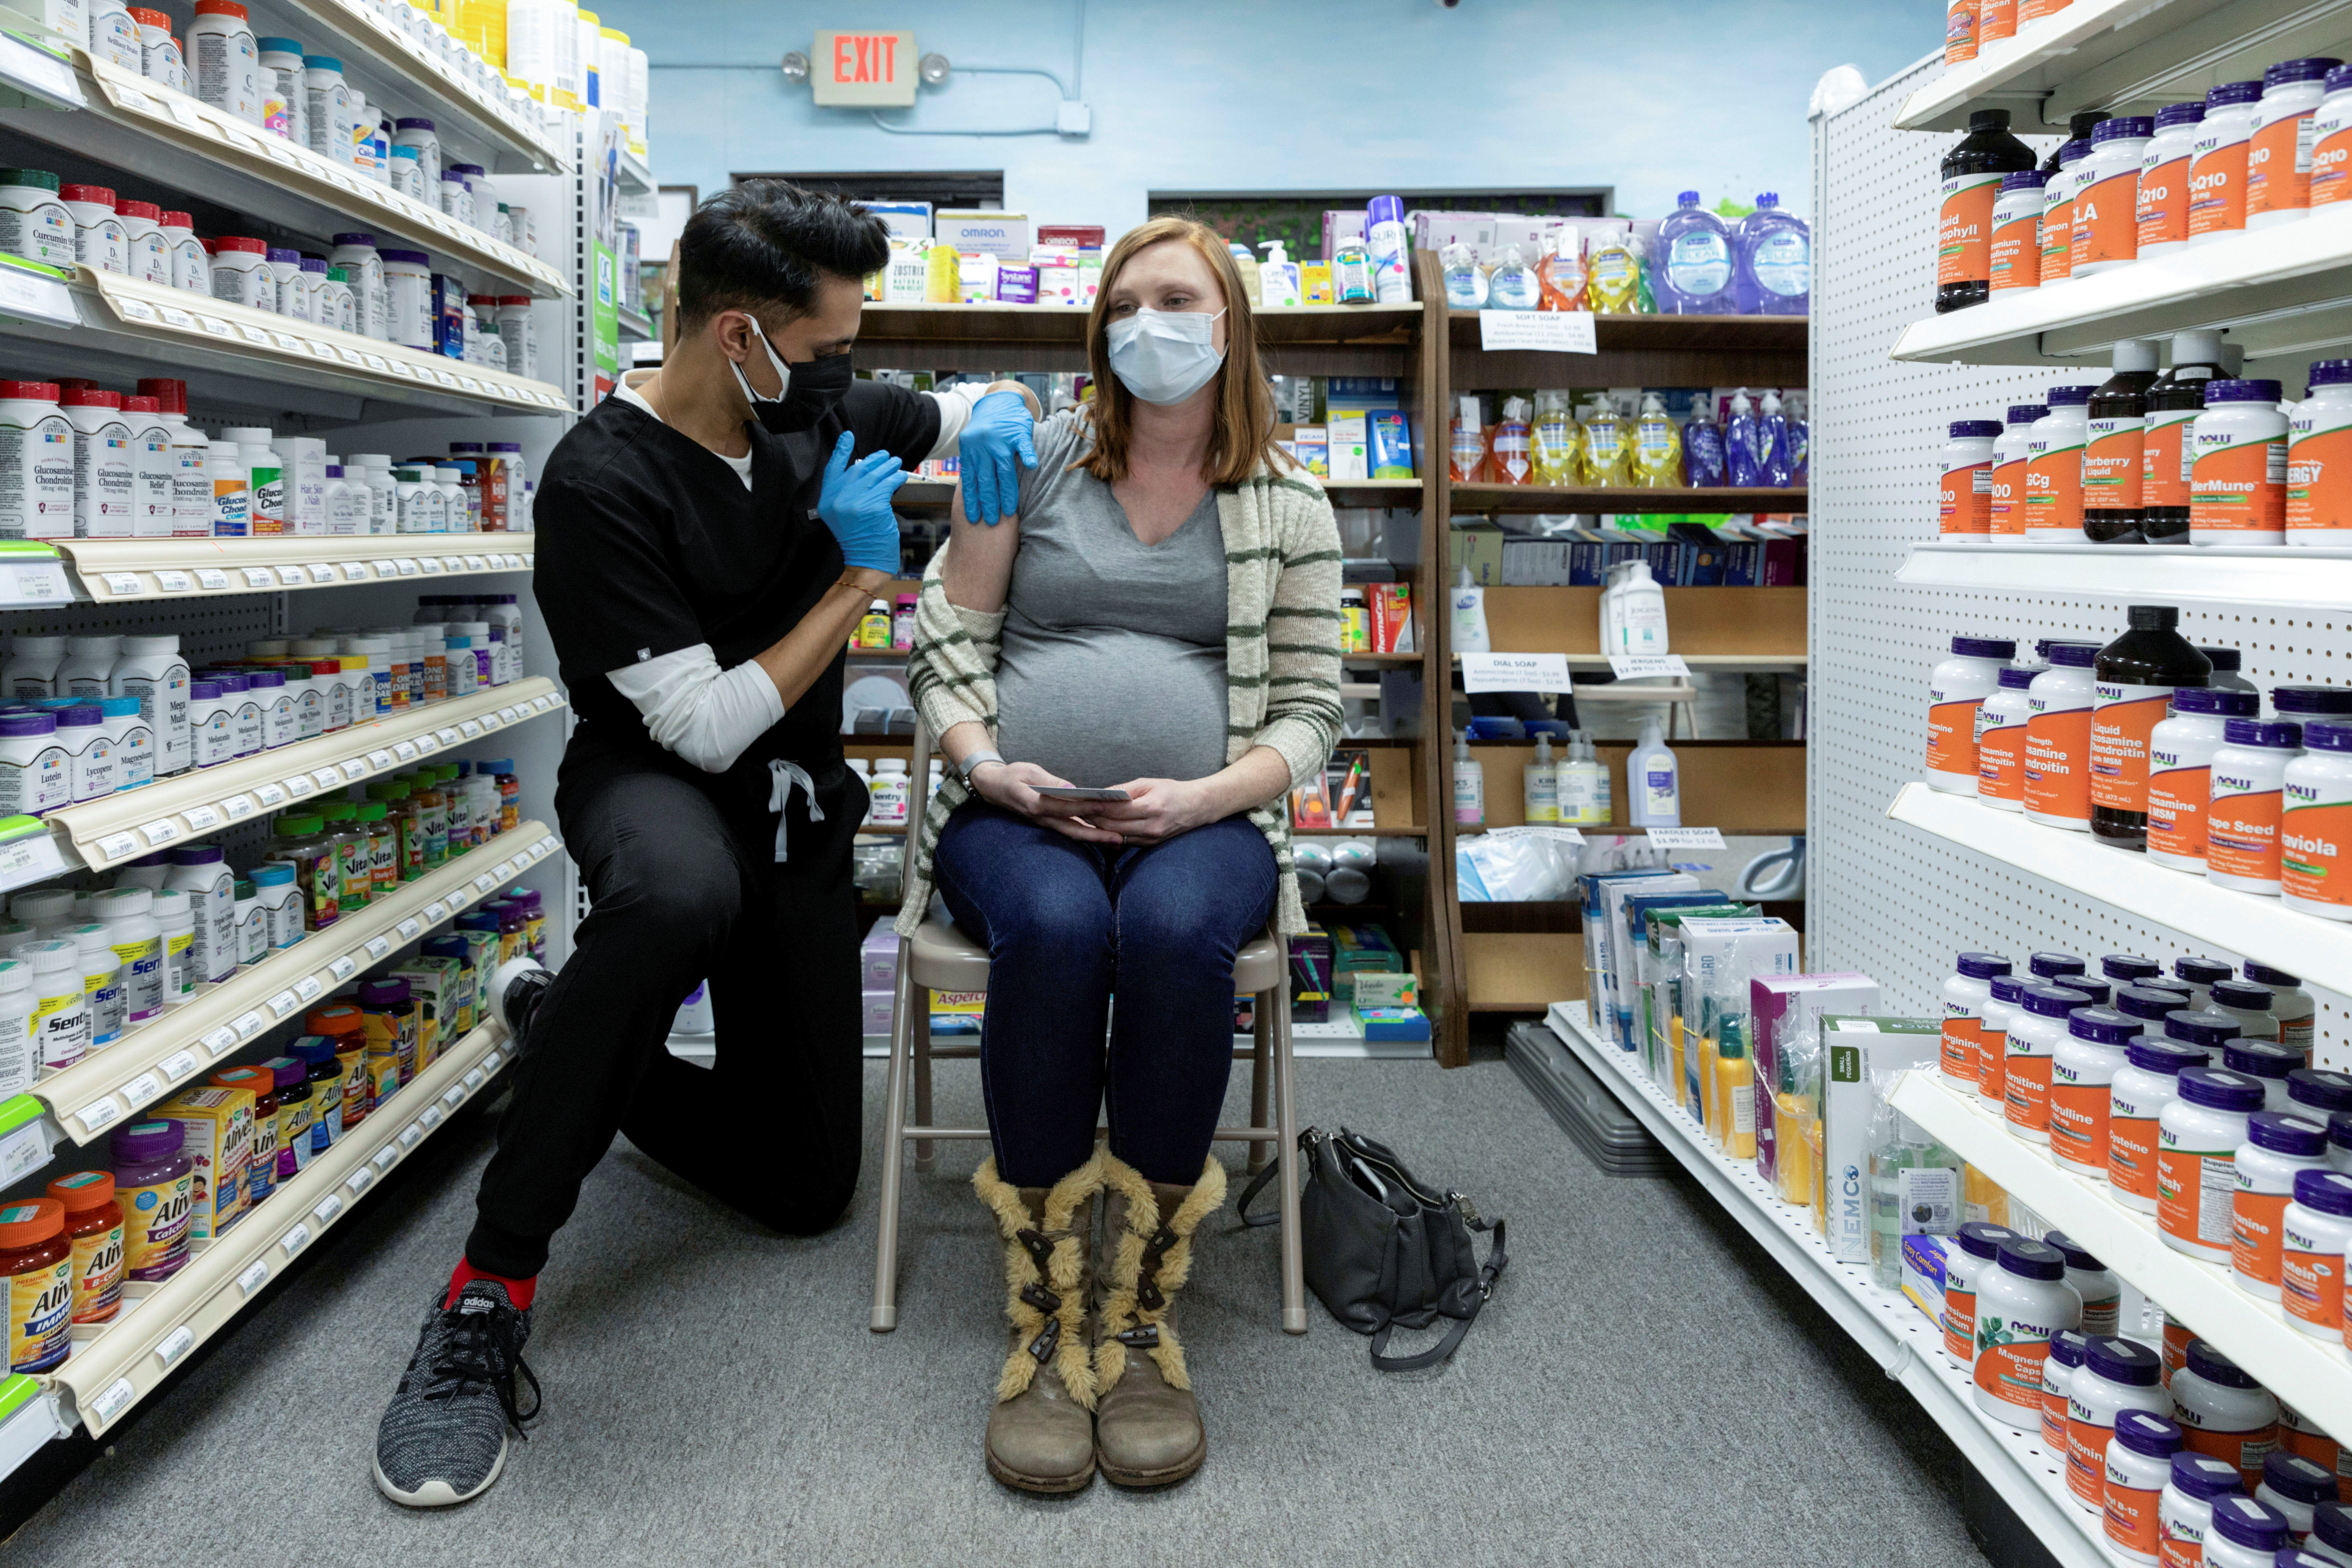 About 90,000 pregnant women have been vaccinated in the US without any safety concerns being raised